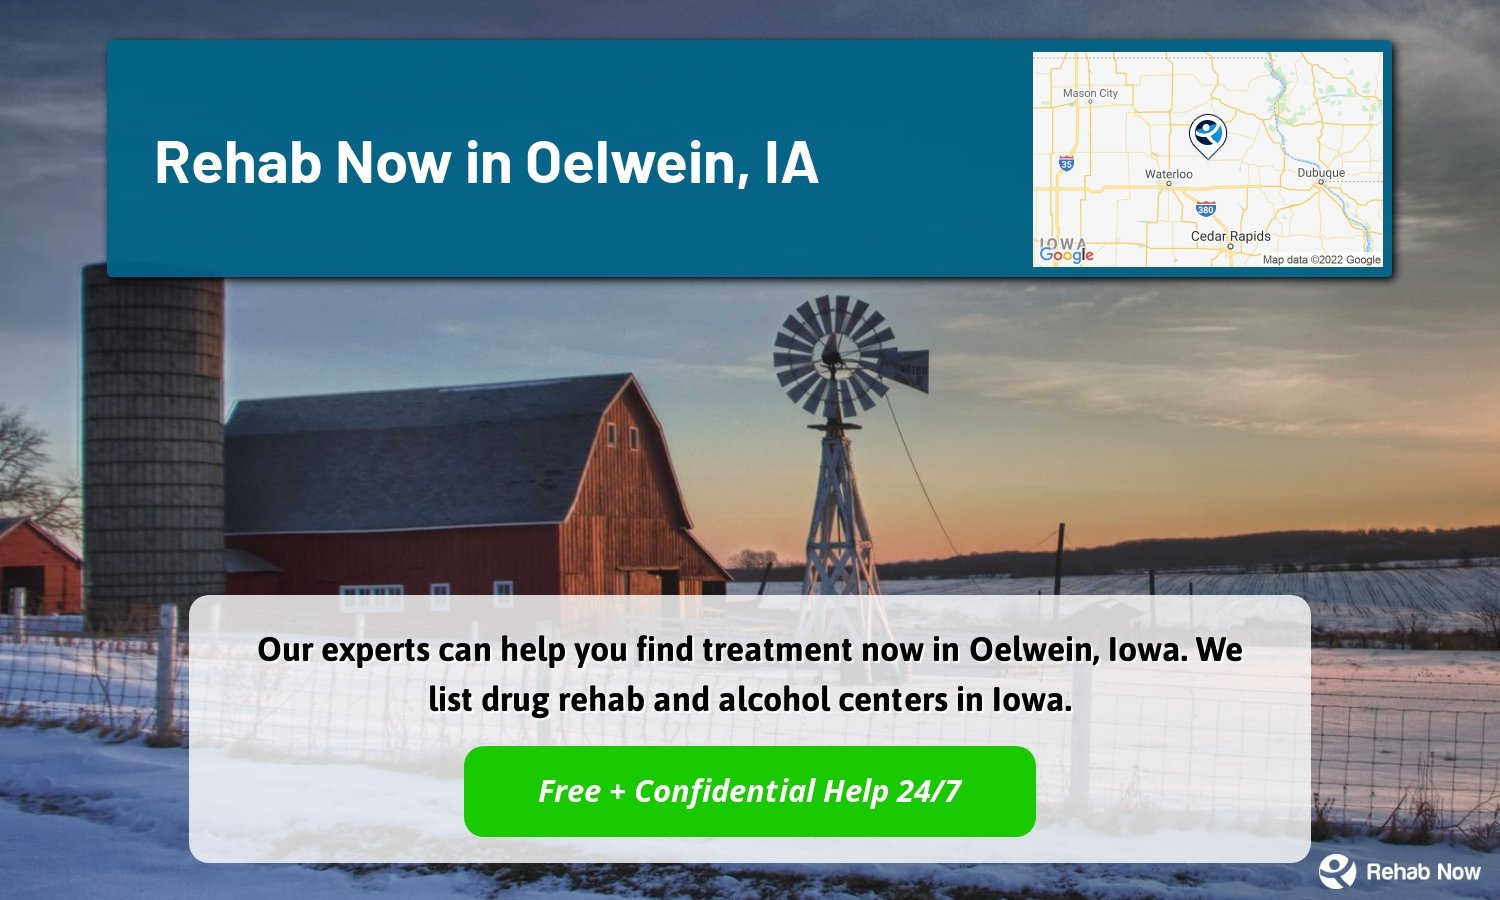 Our experts can help you find treatment now in Oelwein, Iowa. We list drug rehab and alcohol centers in Iowa.